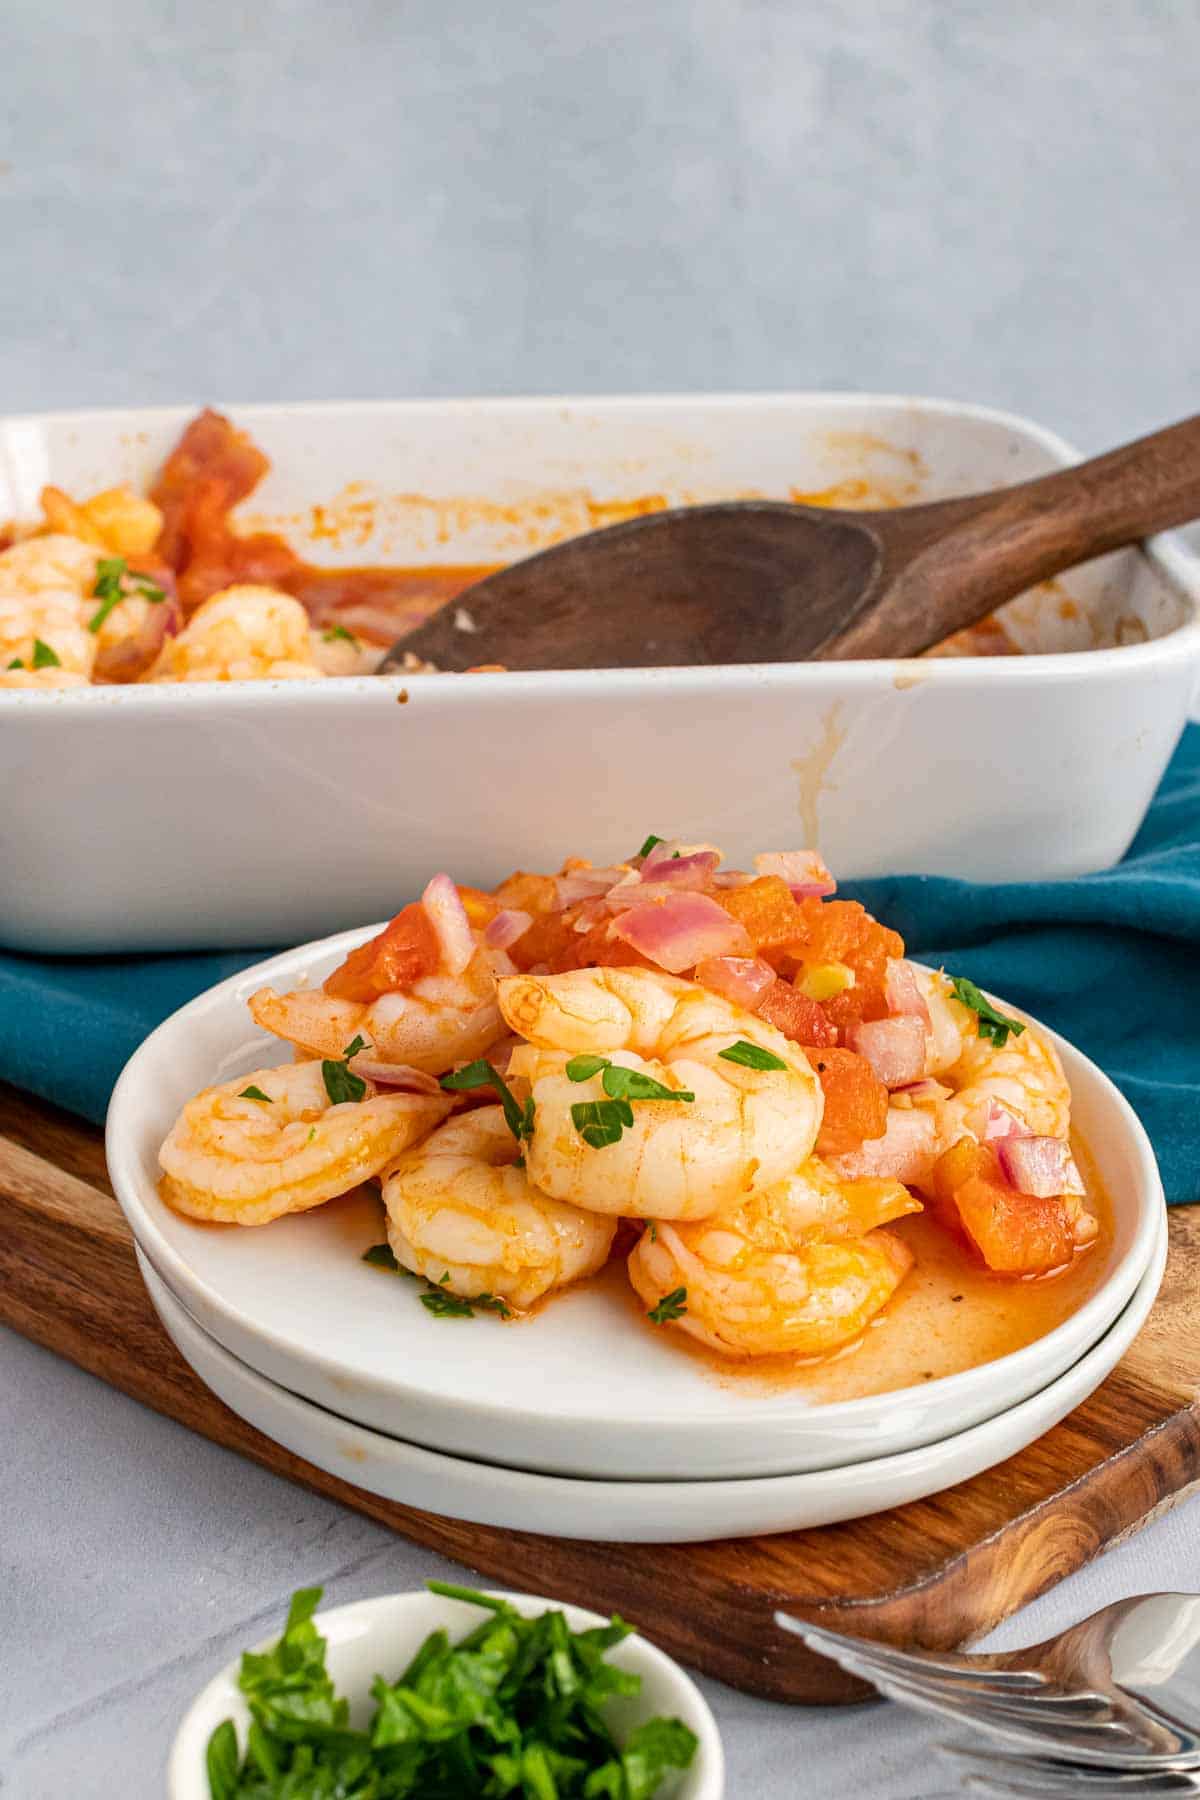 Plate of shrimp in front of the baking dish